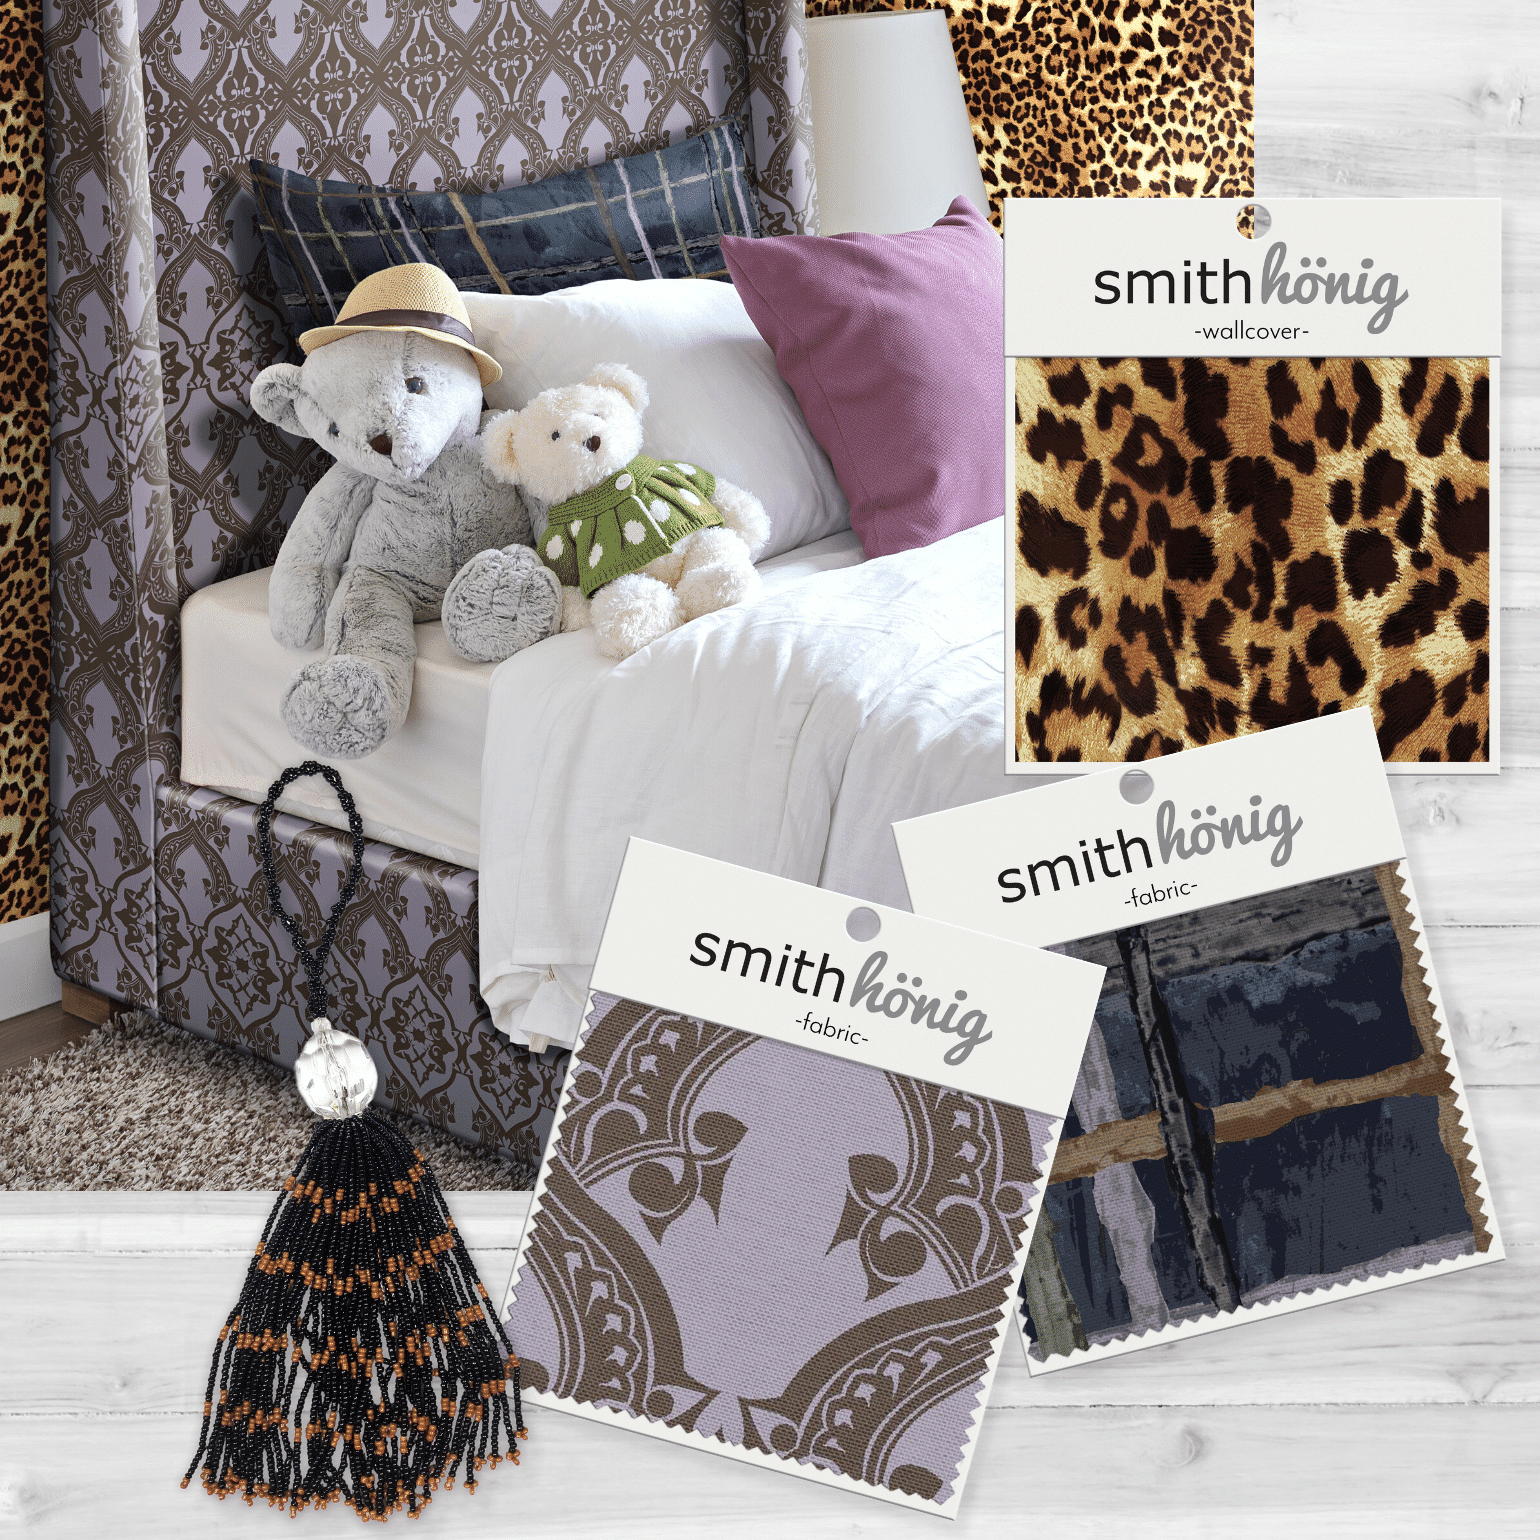 Pantone's Color of the Year, Very Peri pairs perfectly with our Moxie Lilac Winter Collection. Explore the ways that you can incorporate Very Peri in your home with a SmithHönig spin!